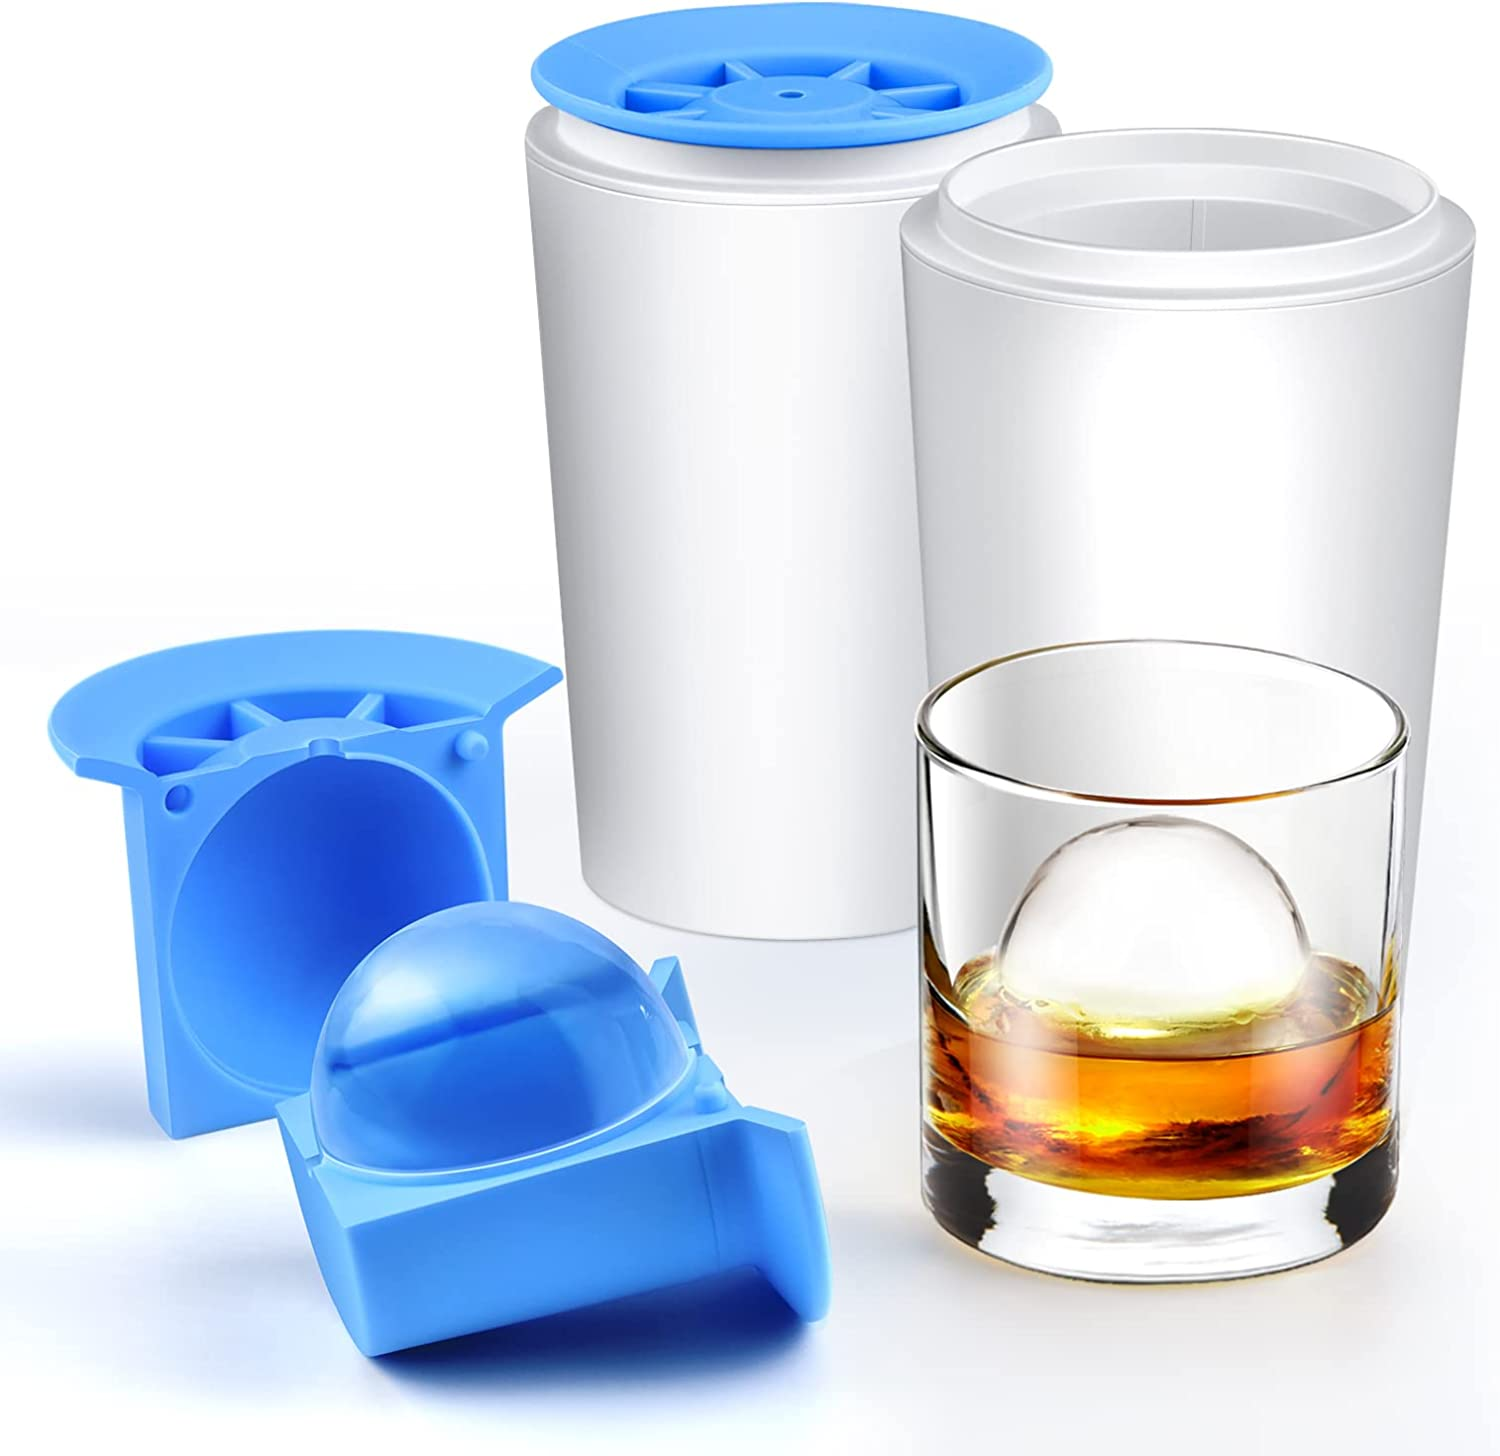 longzon Mini Round Ice Cube Tray with Lid and Bin,3 pack Silicone Ice